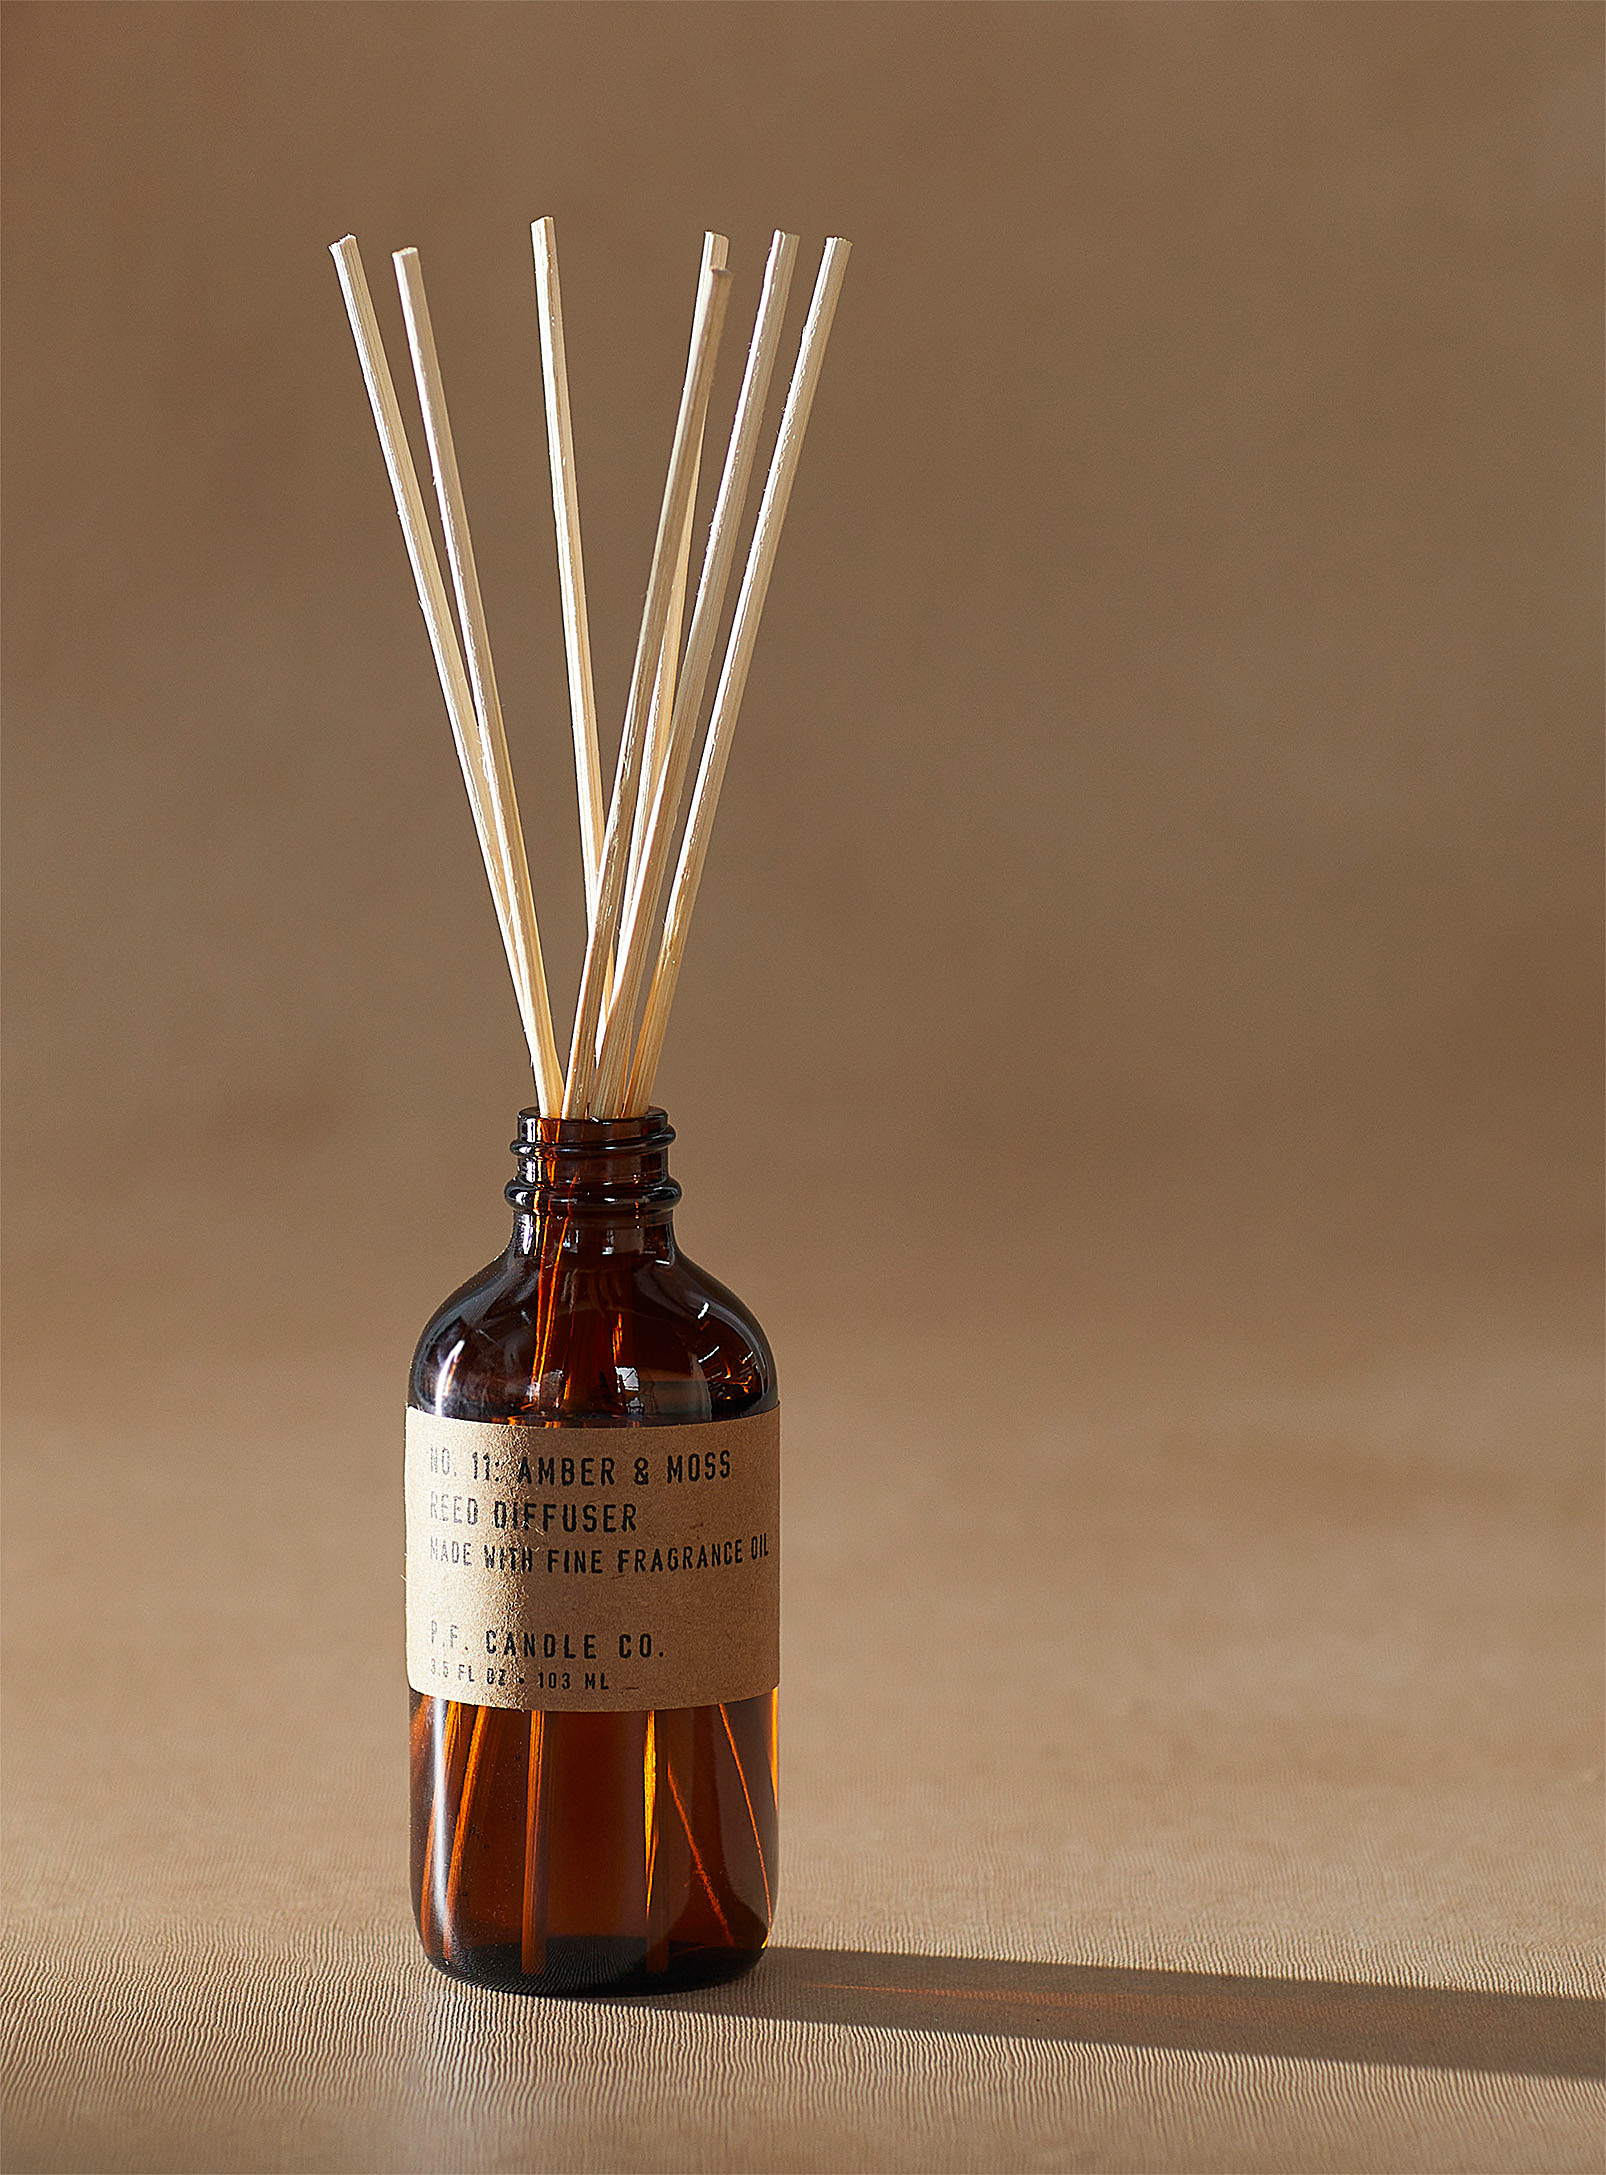 P.F. Candle Co. - Amber moss diffuser